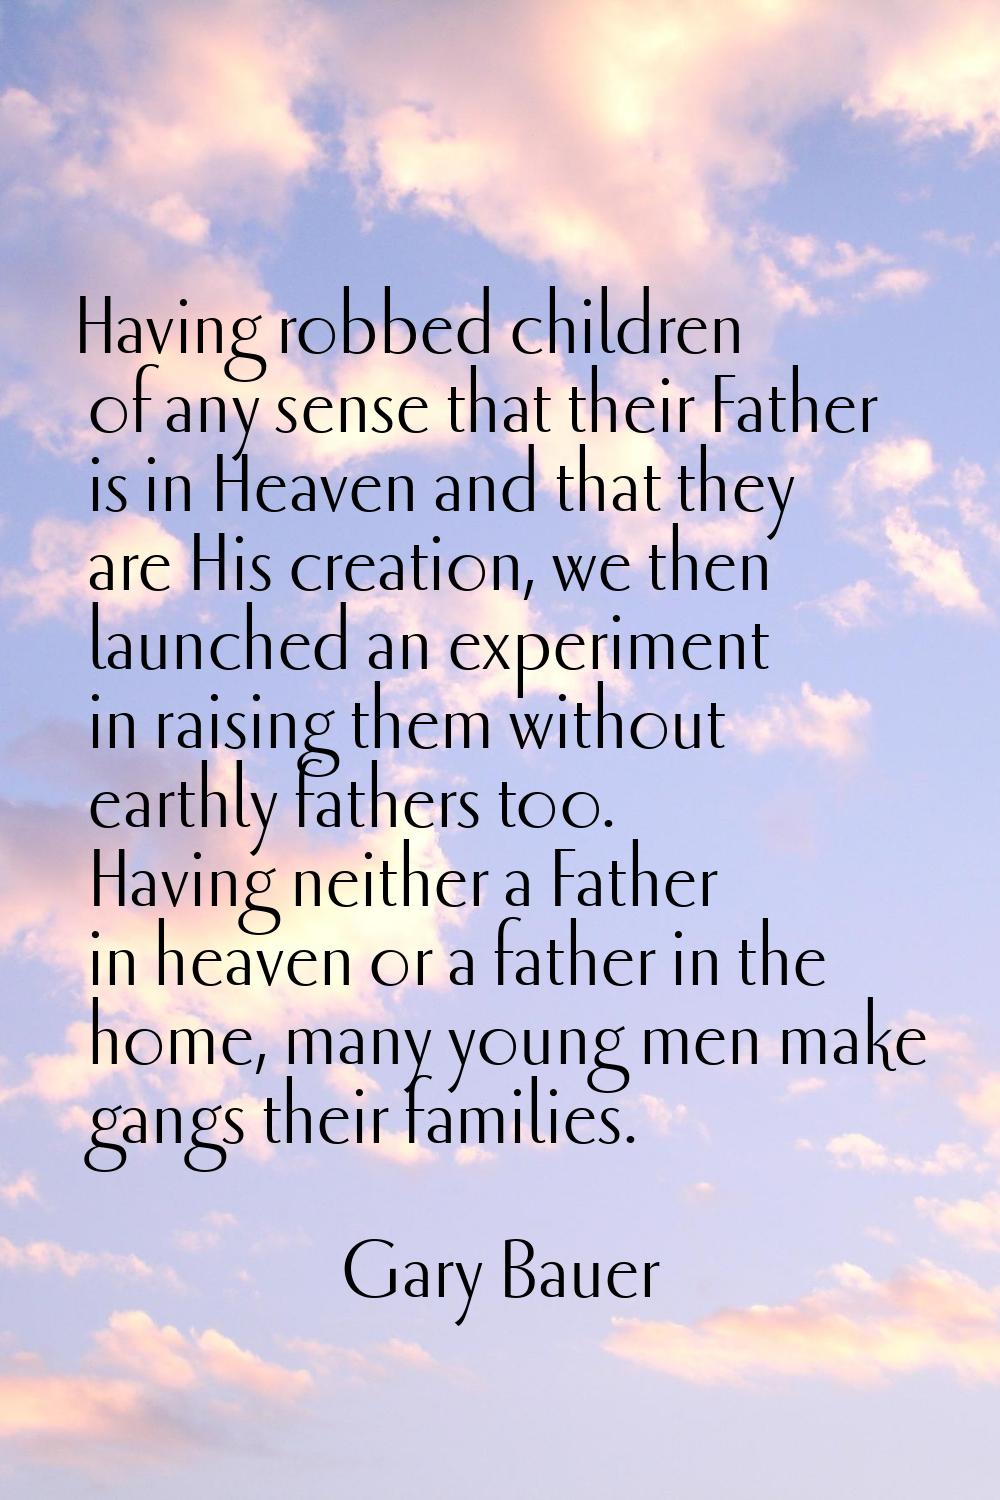 Having robbed children of any sense that their Father is in Heaven and that they are His creation, 